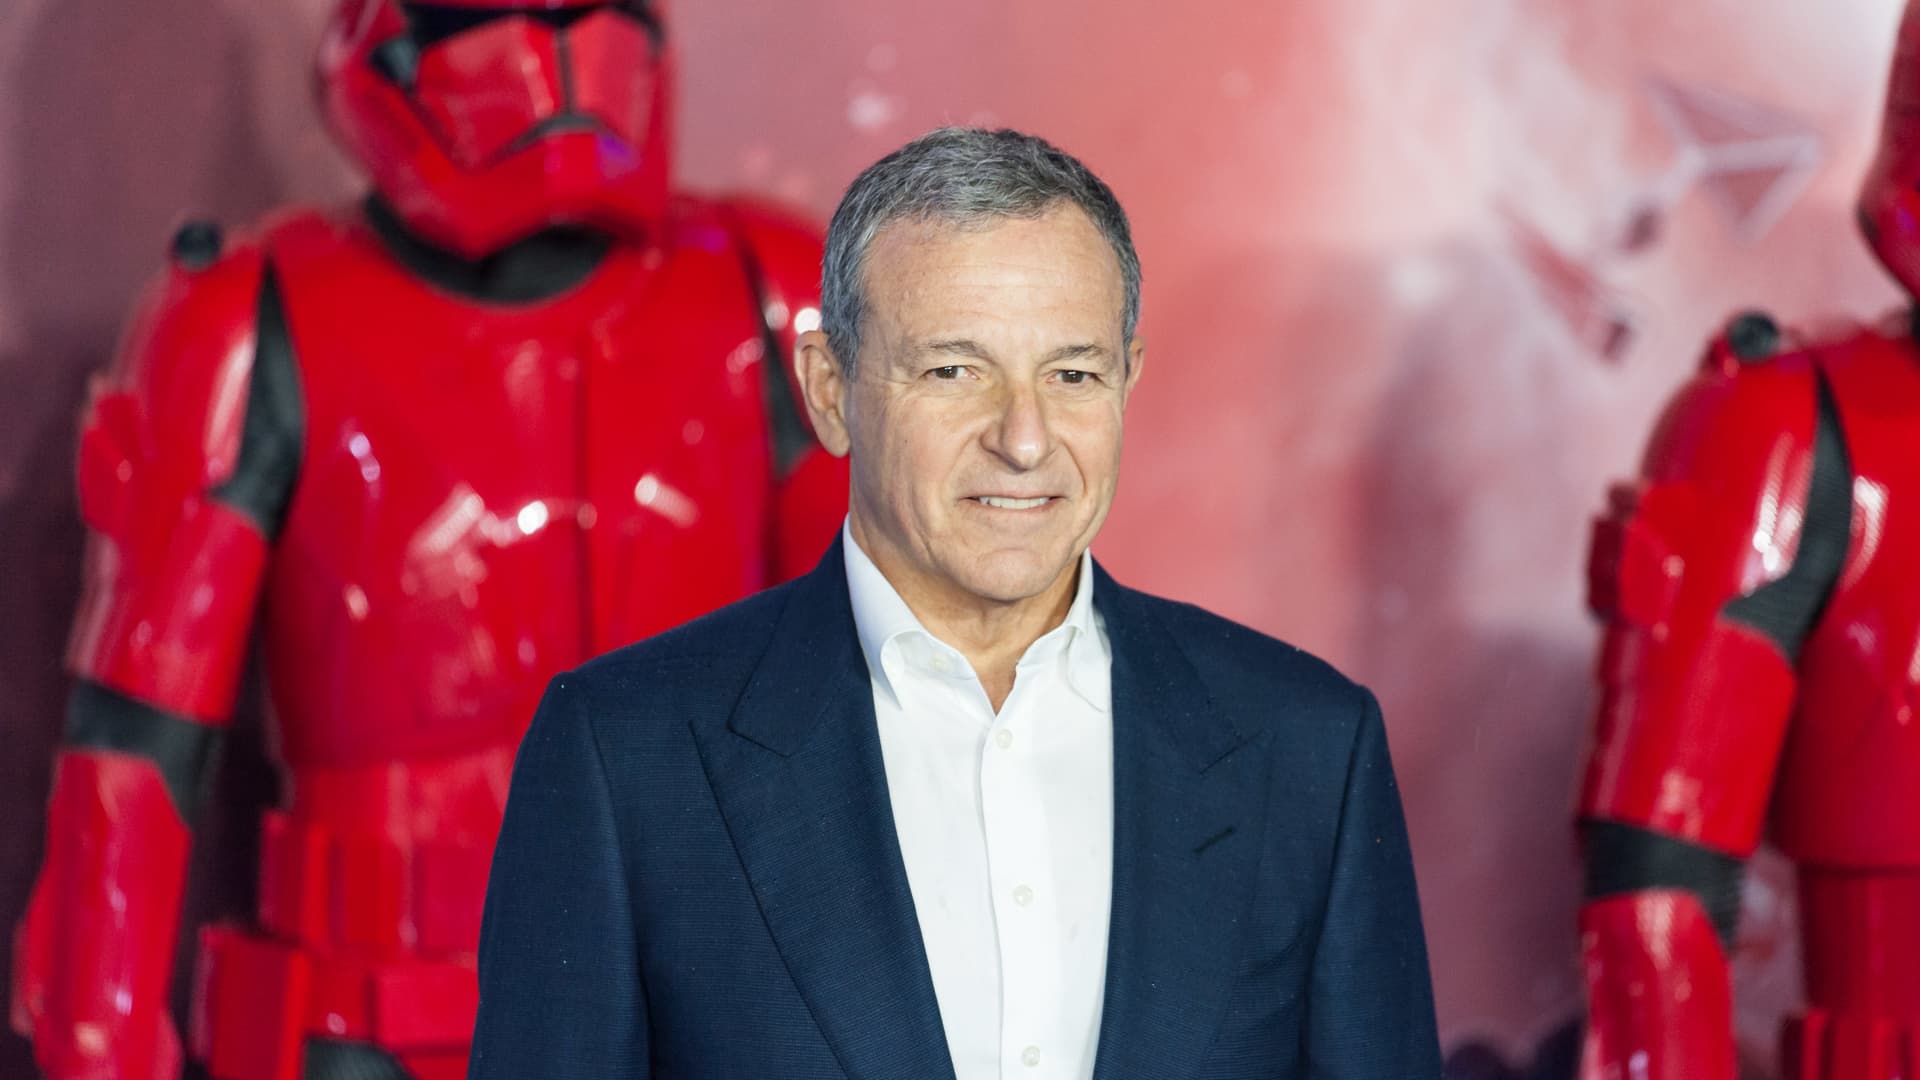 Disney blindsided Chapek with choice to exchange him with Iger